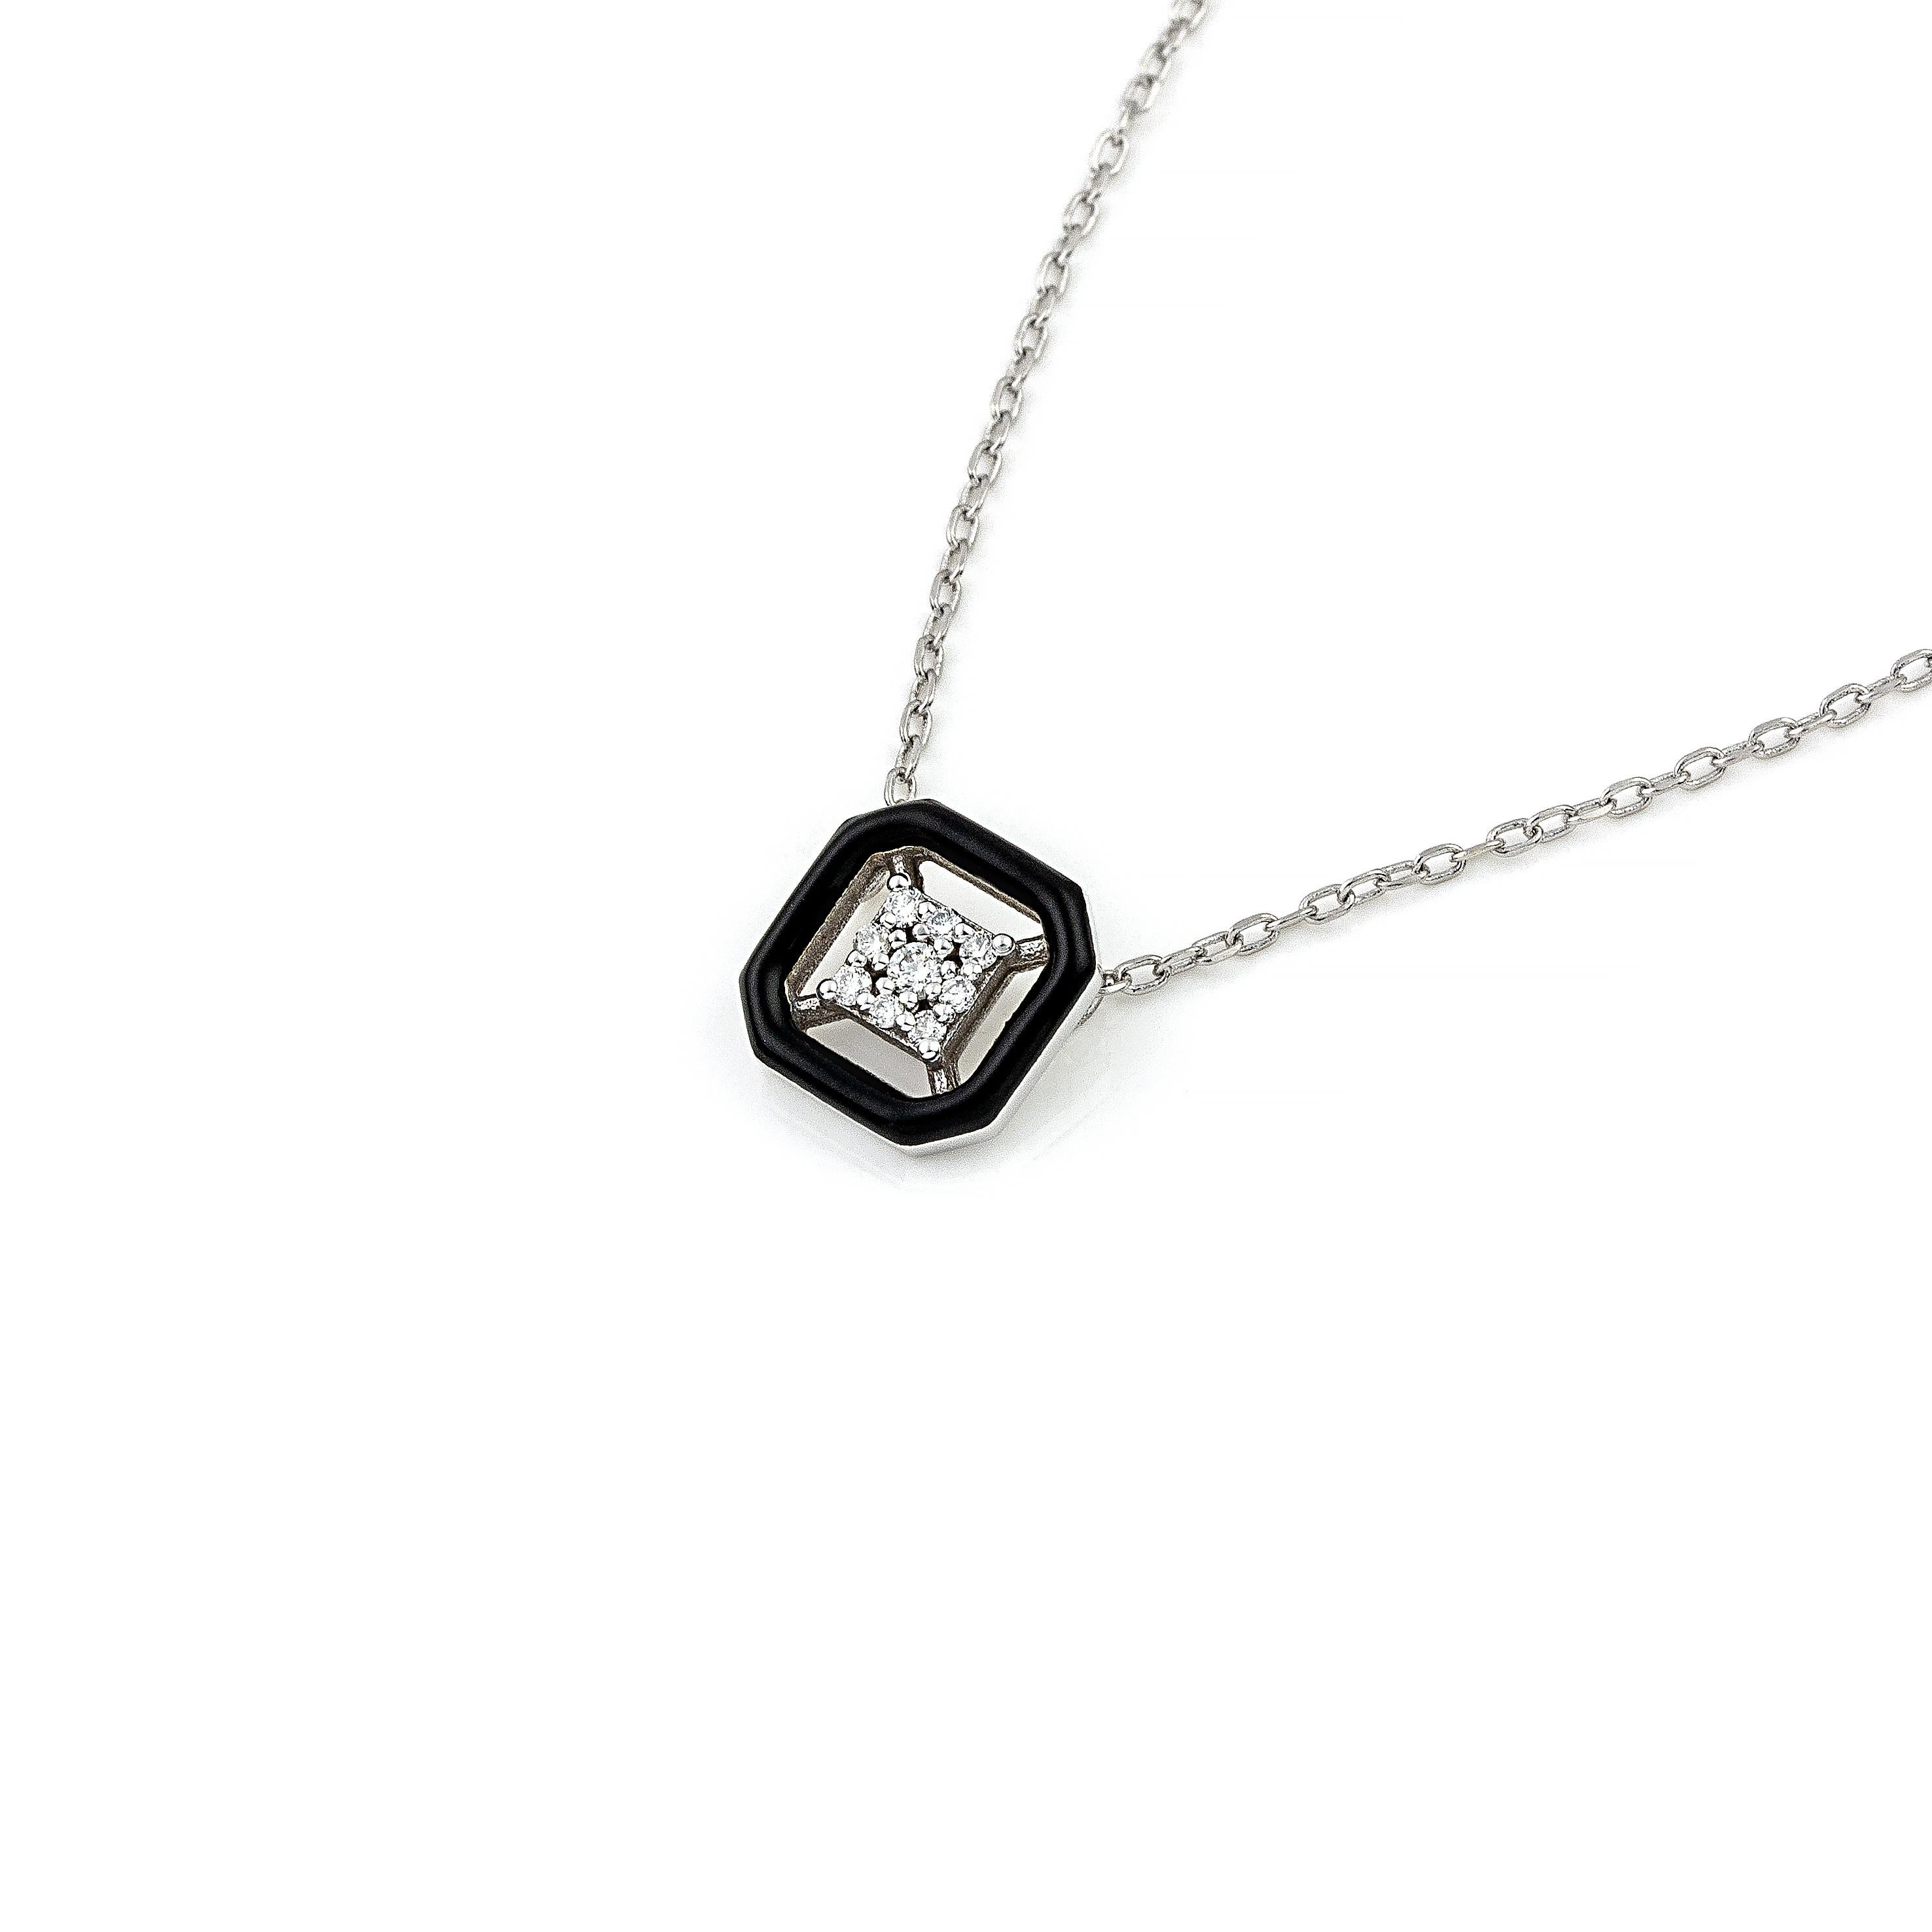 14K gold diamond pendant necklace with a classic black colour accent, the perfect gift for yourself or a loved one.
100% Recycled 14 K White Gold
Diamonds
Black Enamel
Size: 1.3 cm/0.51 inches
Inspiration: In the arts, maximalism, a reaction against